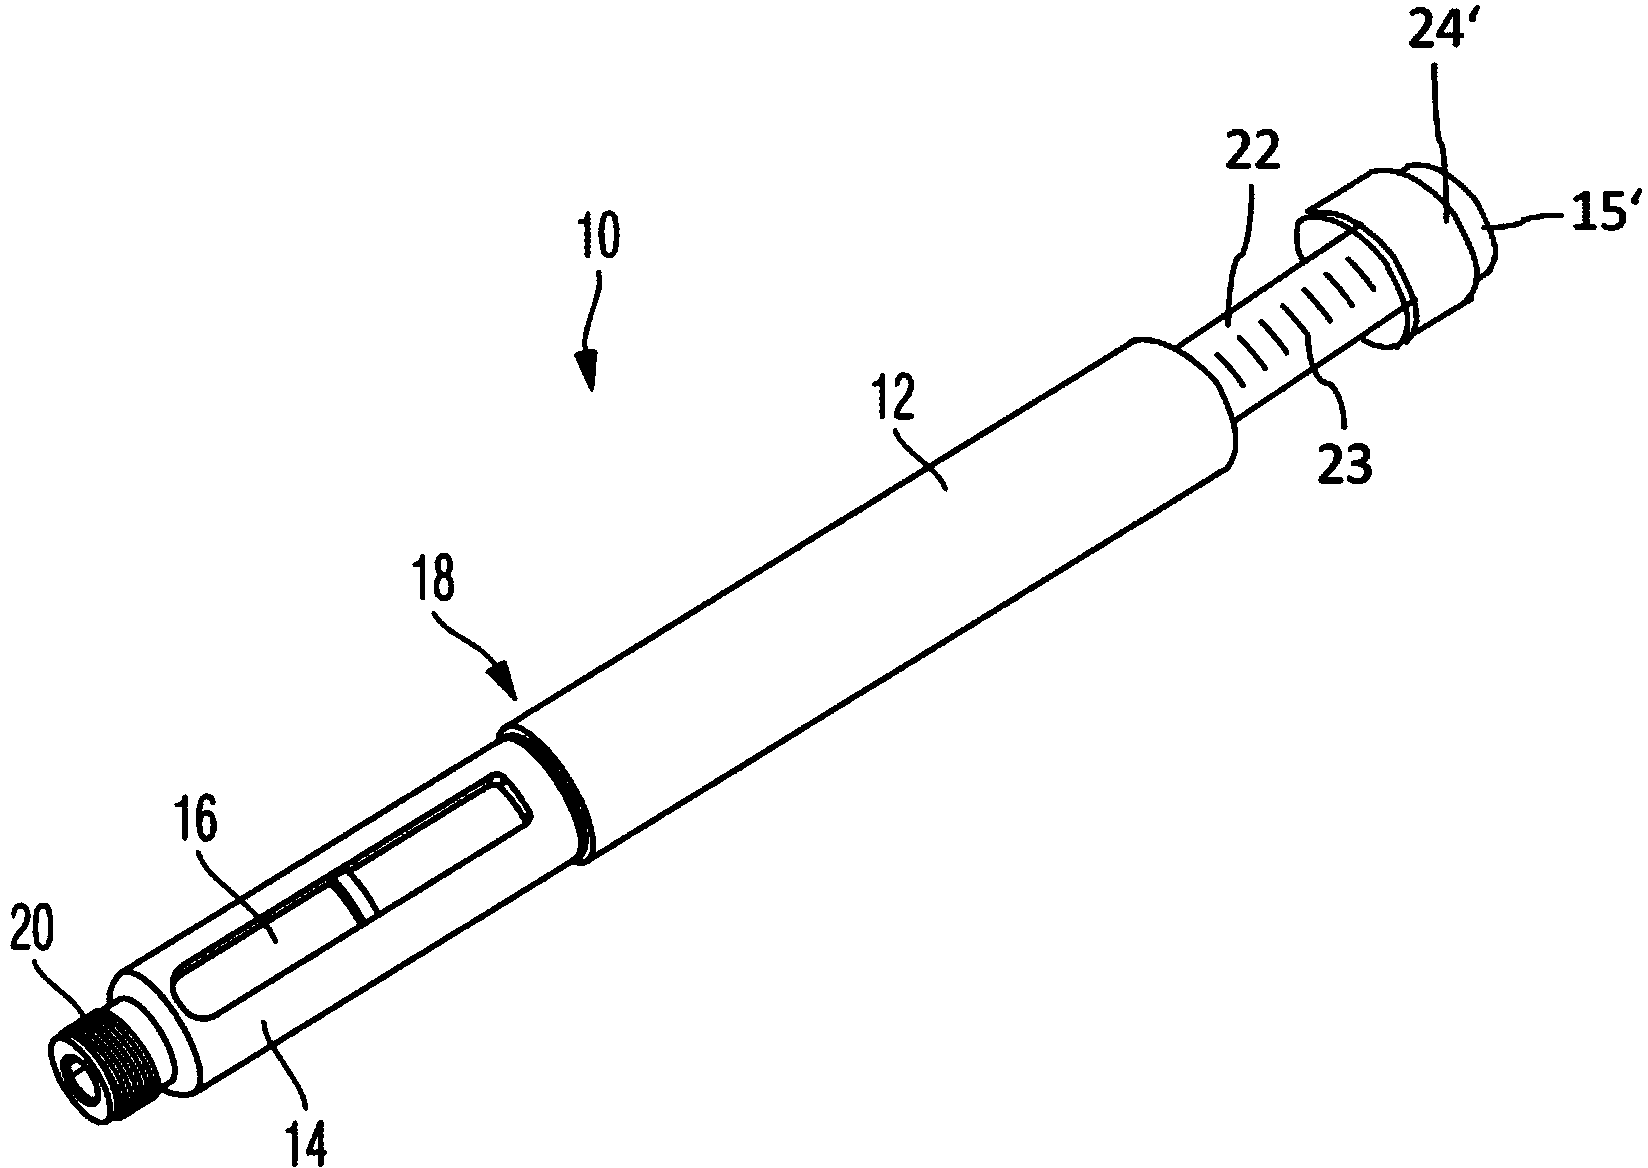 Drug delivery device with electro-mechanic drive mechanism